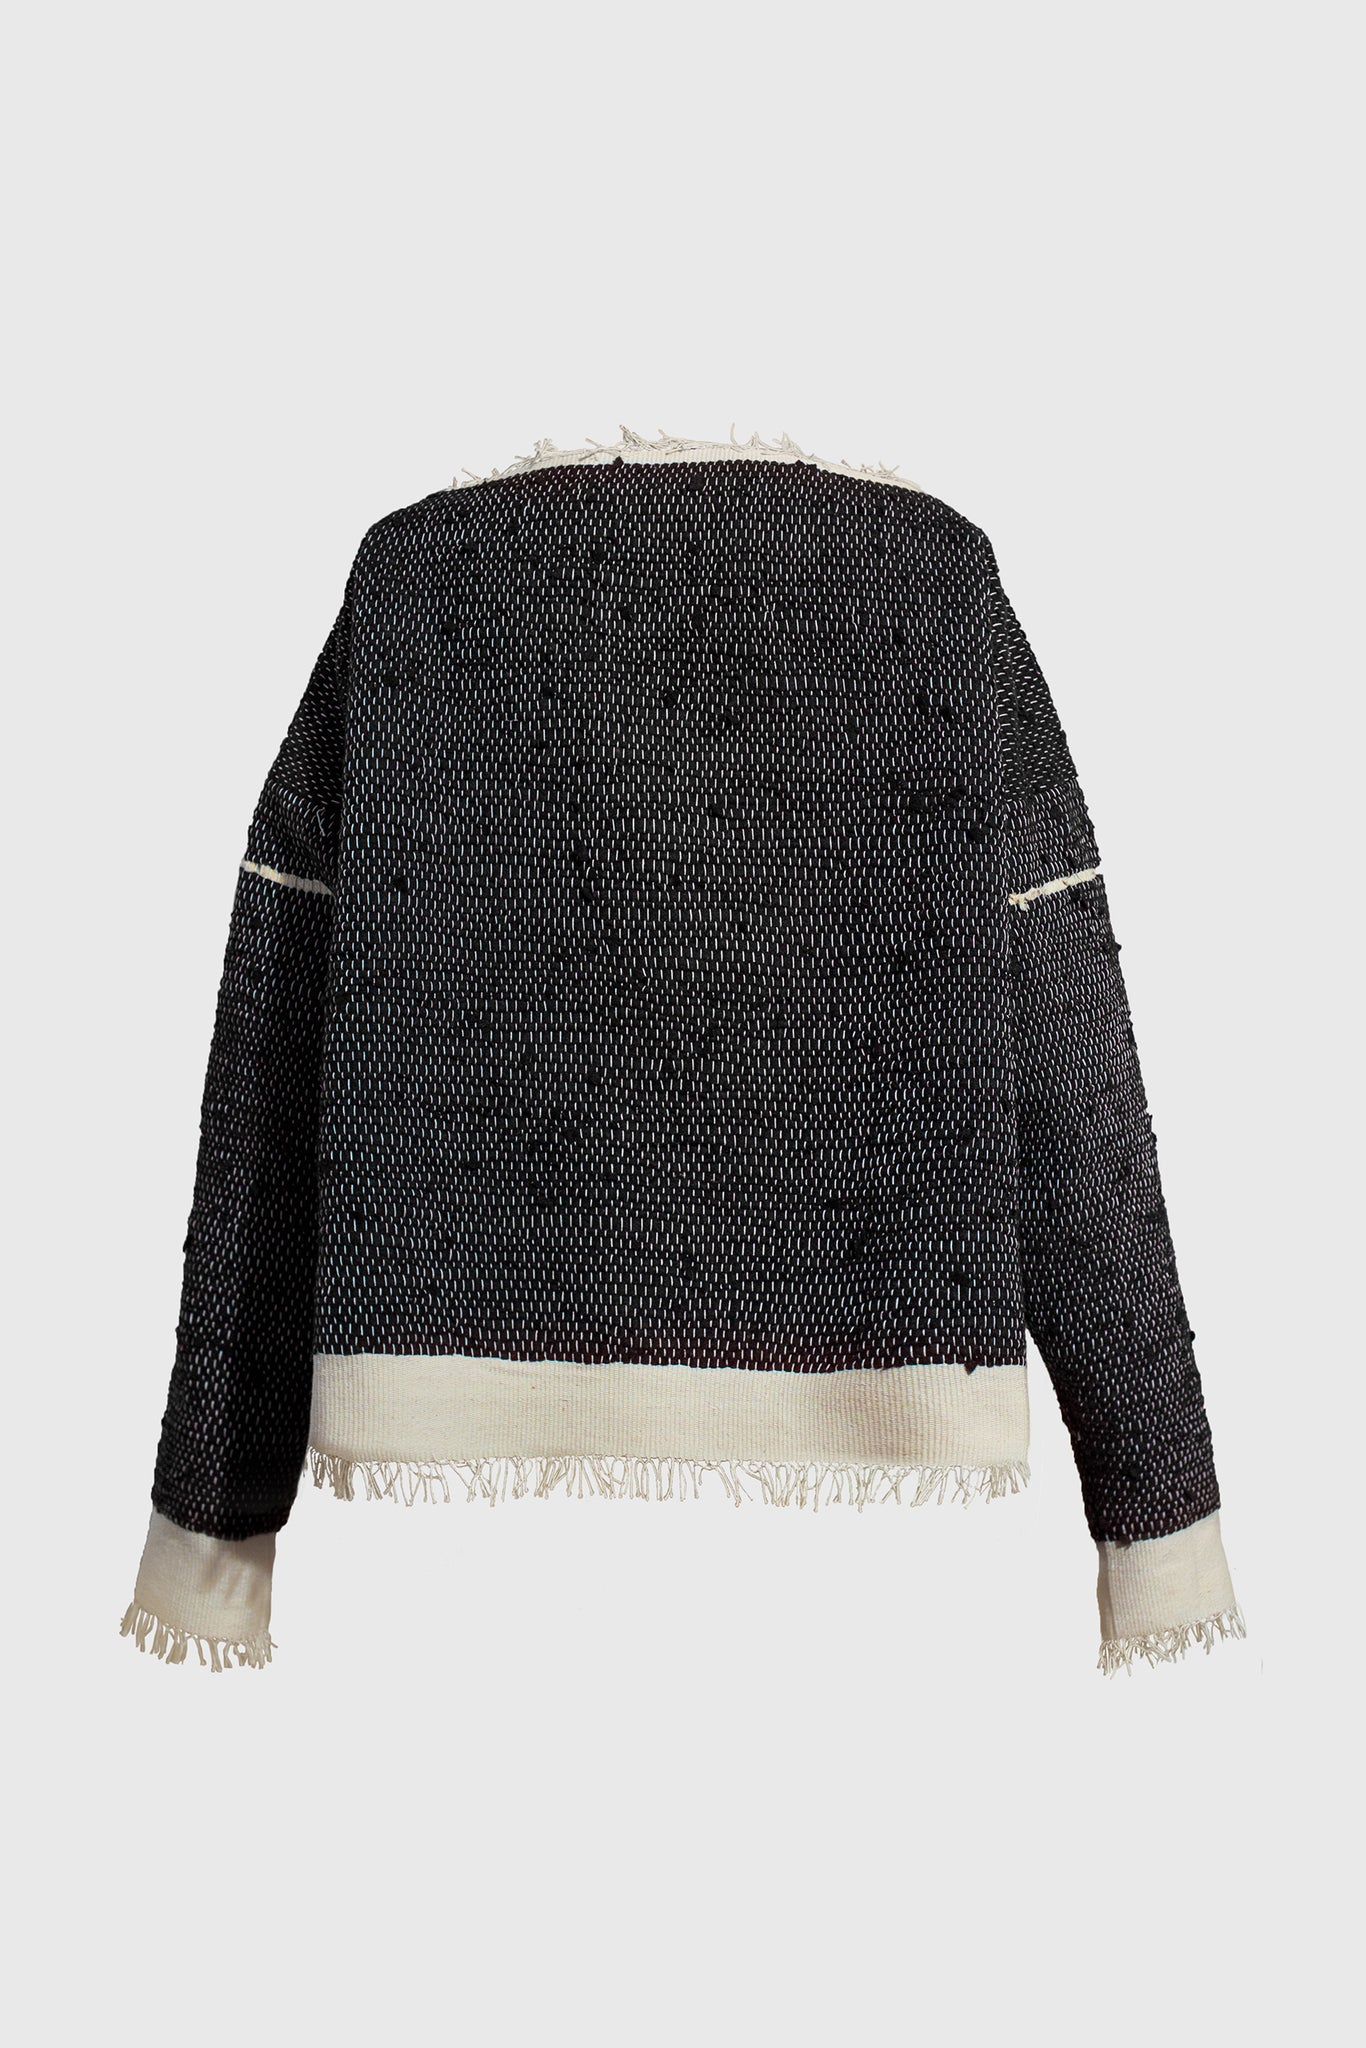 Ruxandra Avantgarde fashion style, black and white sweater, unisex for men and women, great for youngsters, teen style, match with any item in your wardrobe, denim jeans, wide trousers, fits different colors, from earth tones to vibrant colors, red, blue, white, orange